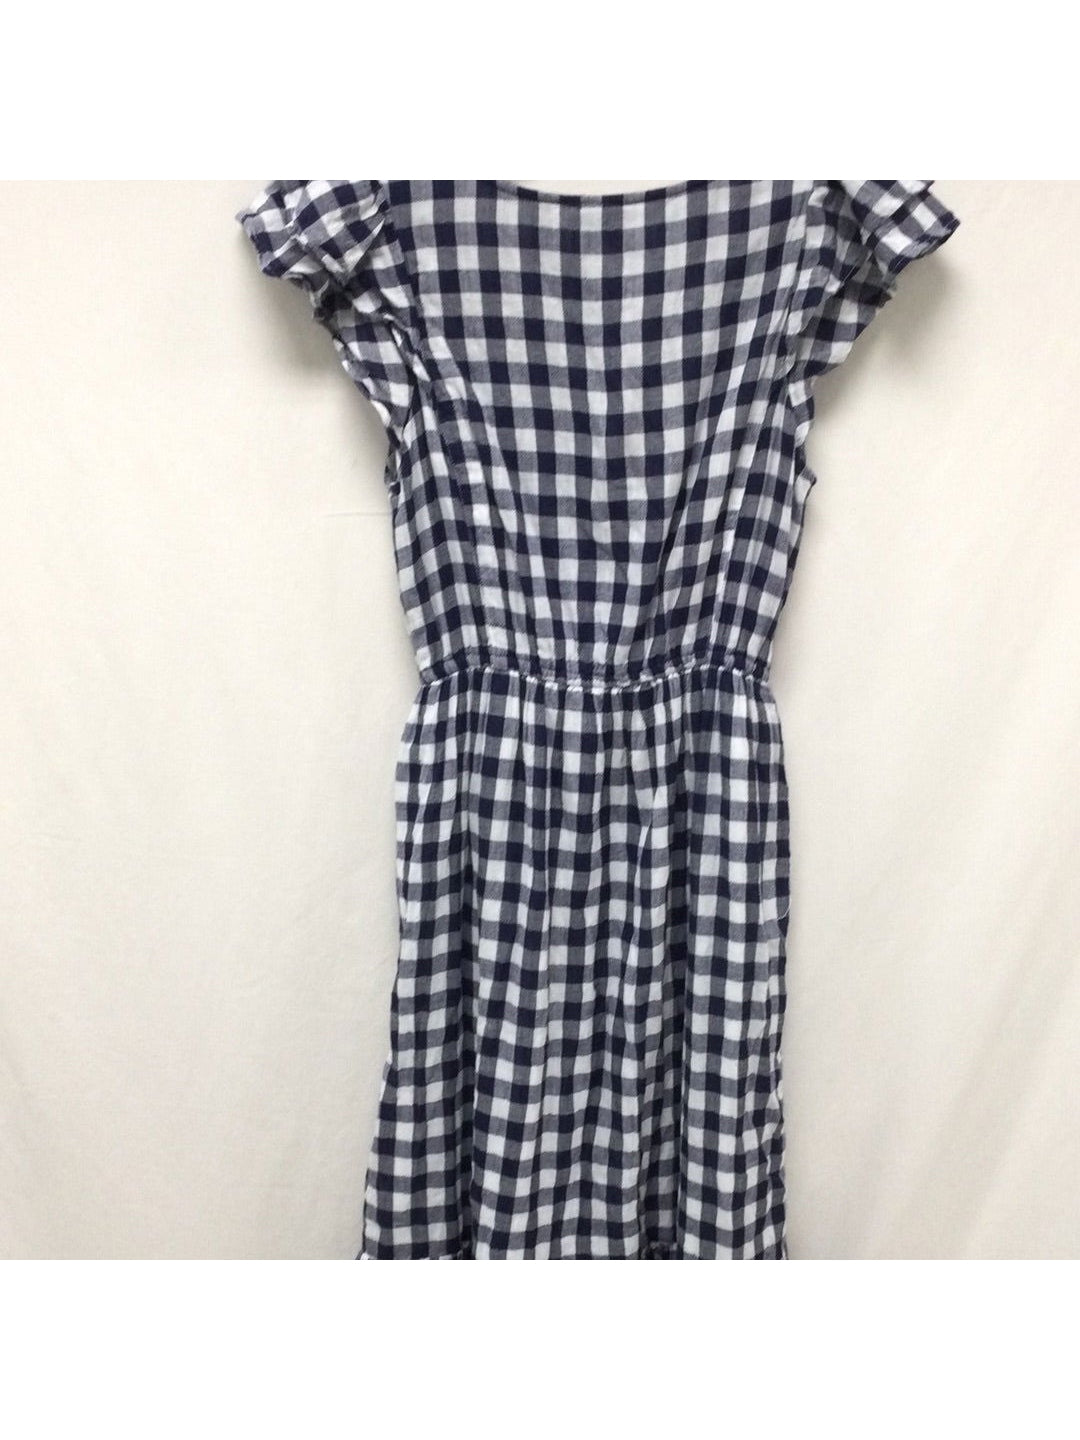 Old Navy Ladies Medium Navy Blue and White Checkered Dress - The Kennedy Collective Thrift - 